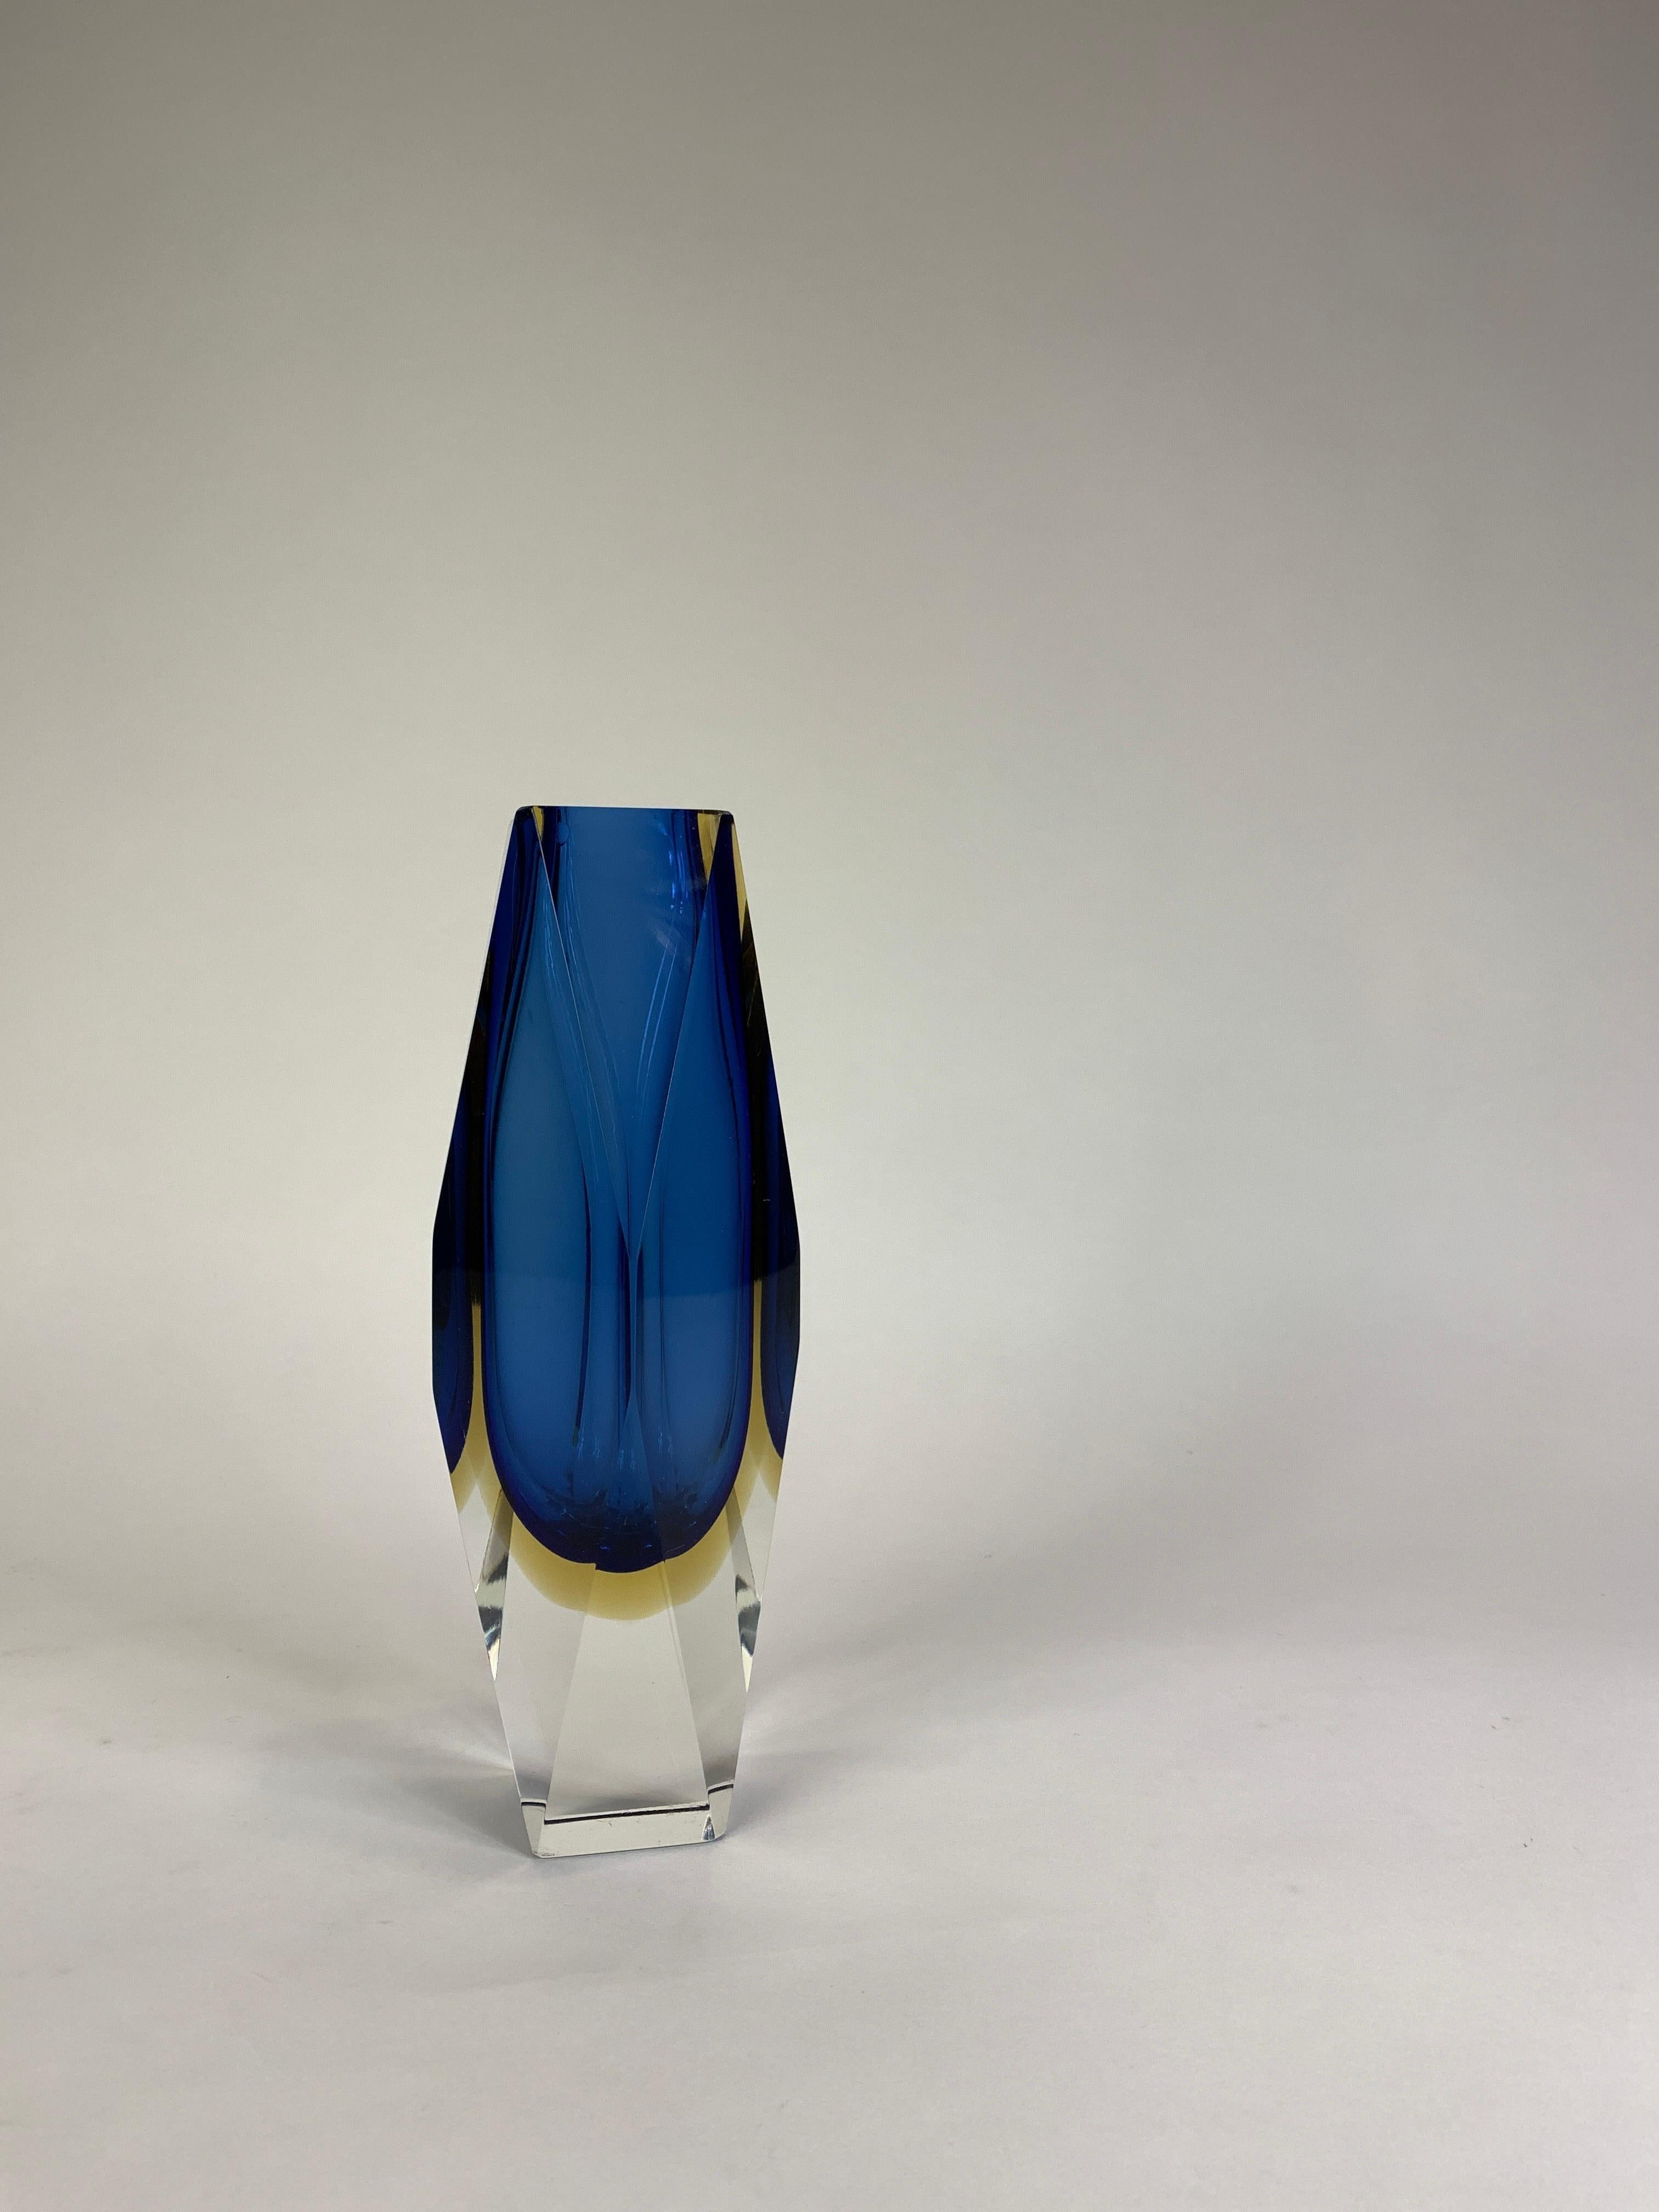 A Mid-Century Modern cobalt blue to yellow to clear faceted Murano glass vase by Alessandro Mandruzzato.